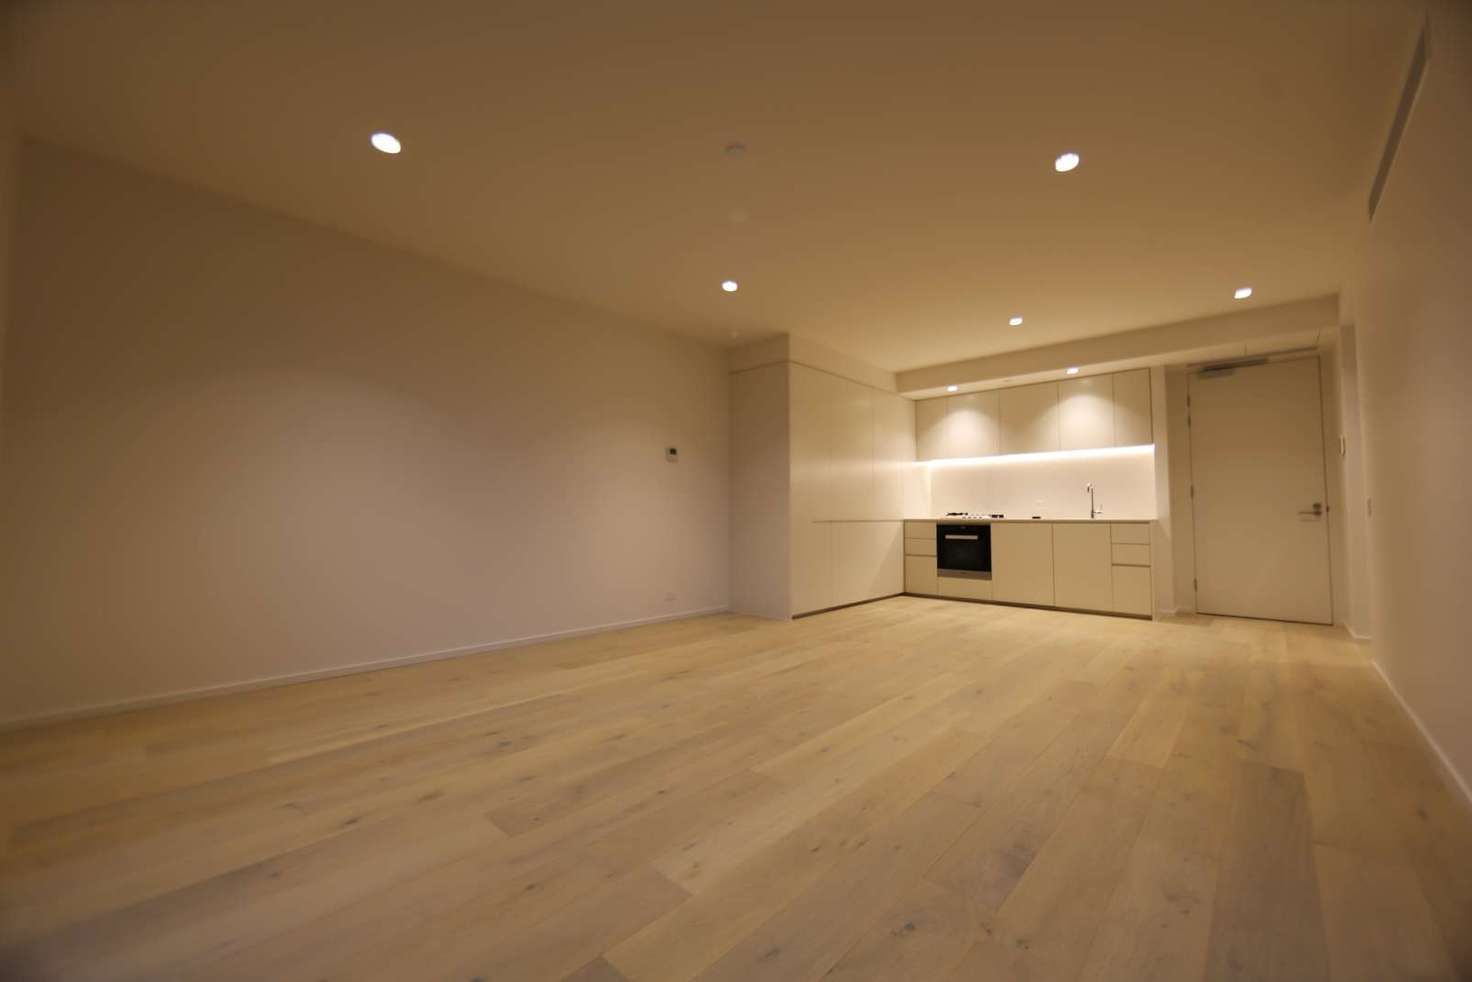 Main view of Homely apartment listing, 401/1 Evergreen Mews, Armadale VIC 3143